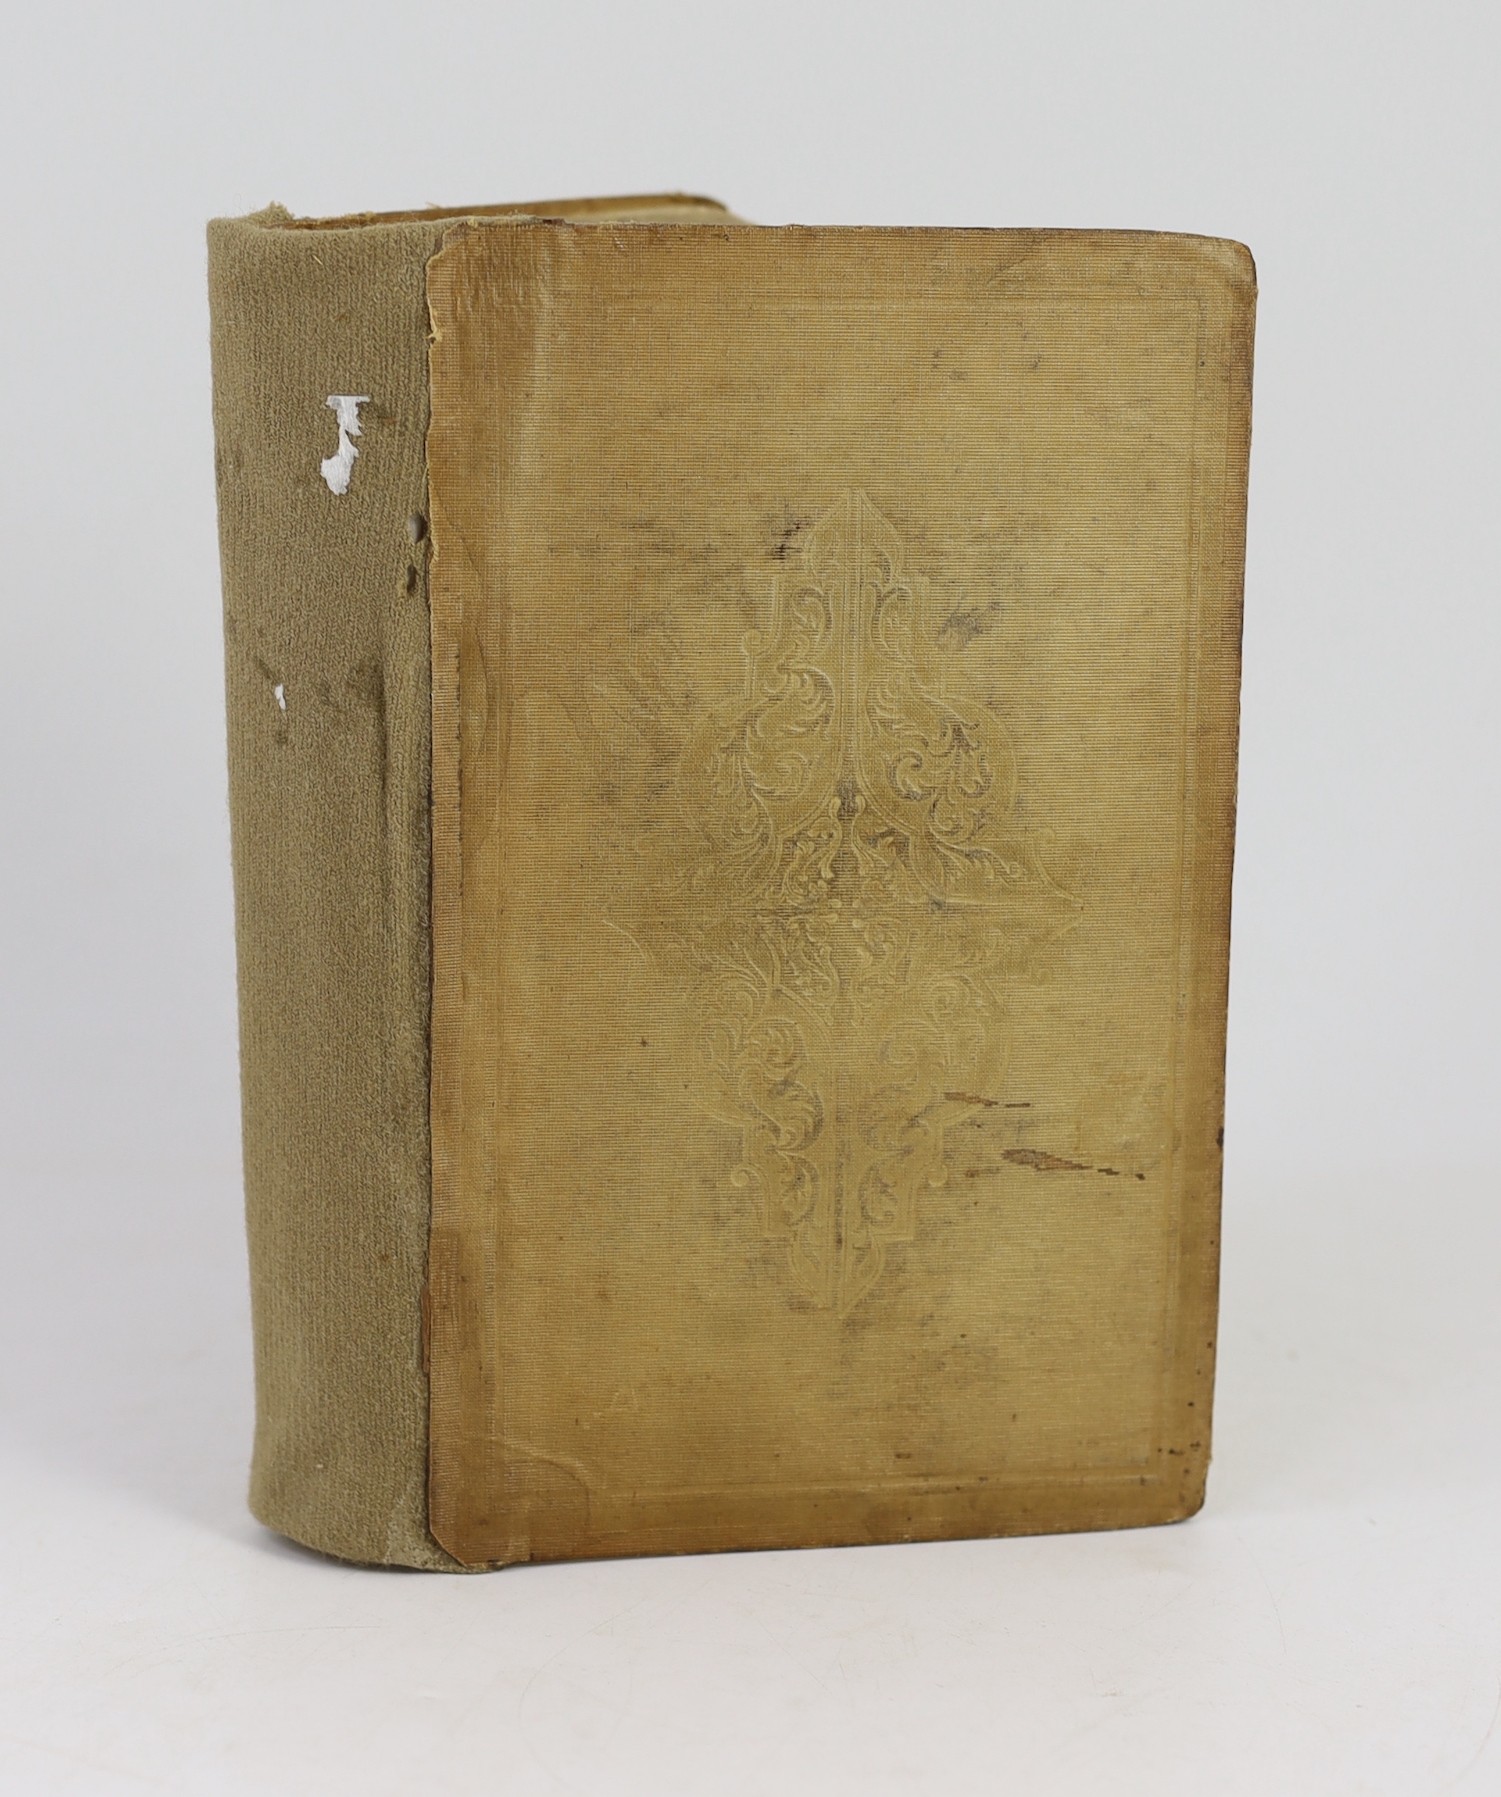 Forbes, Frederick E. - Five Years in China, 8vo, original cloth, front fly leaf inscribed’’To the Drawing Room Winkfield Place” [near Windsor], replacement fabric spine, with coloured portrait frontis, Richard Bentley, L